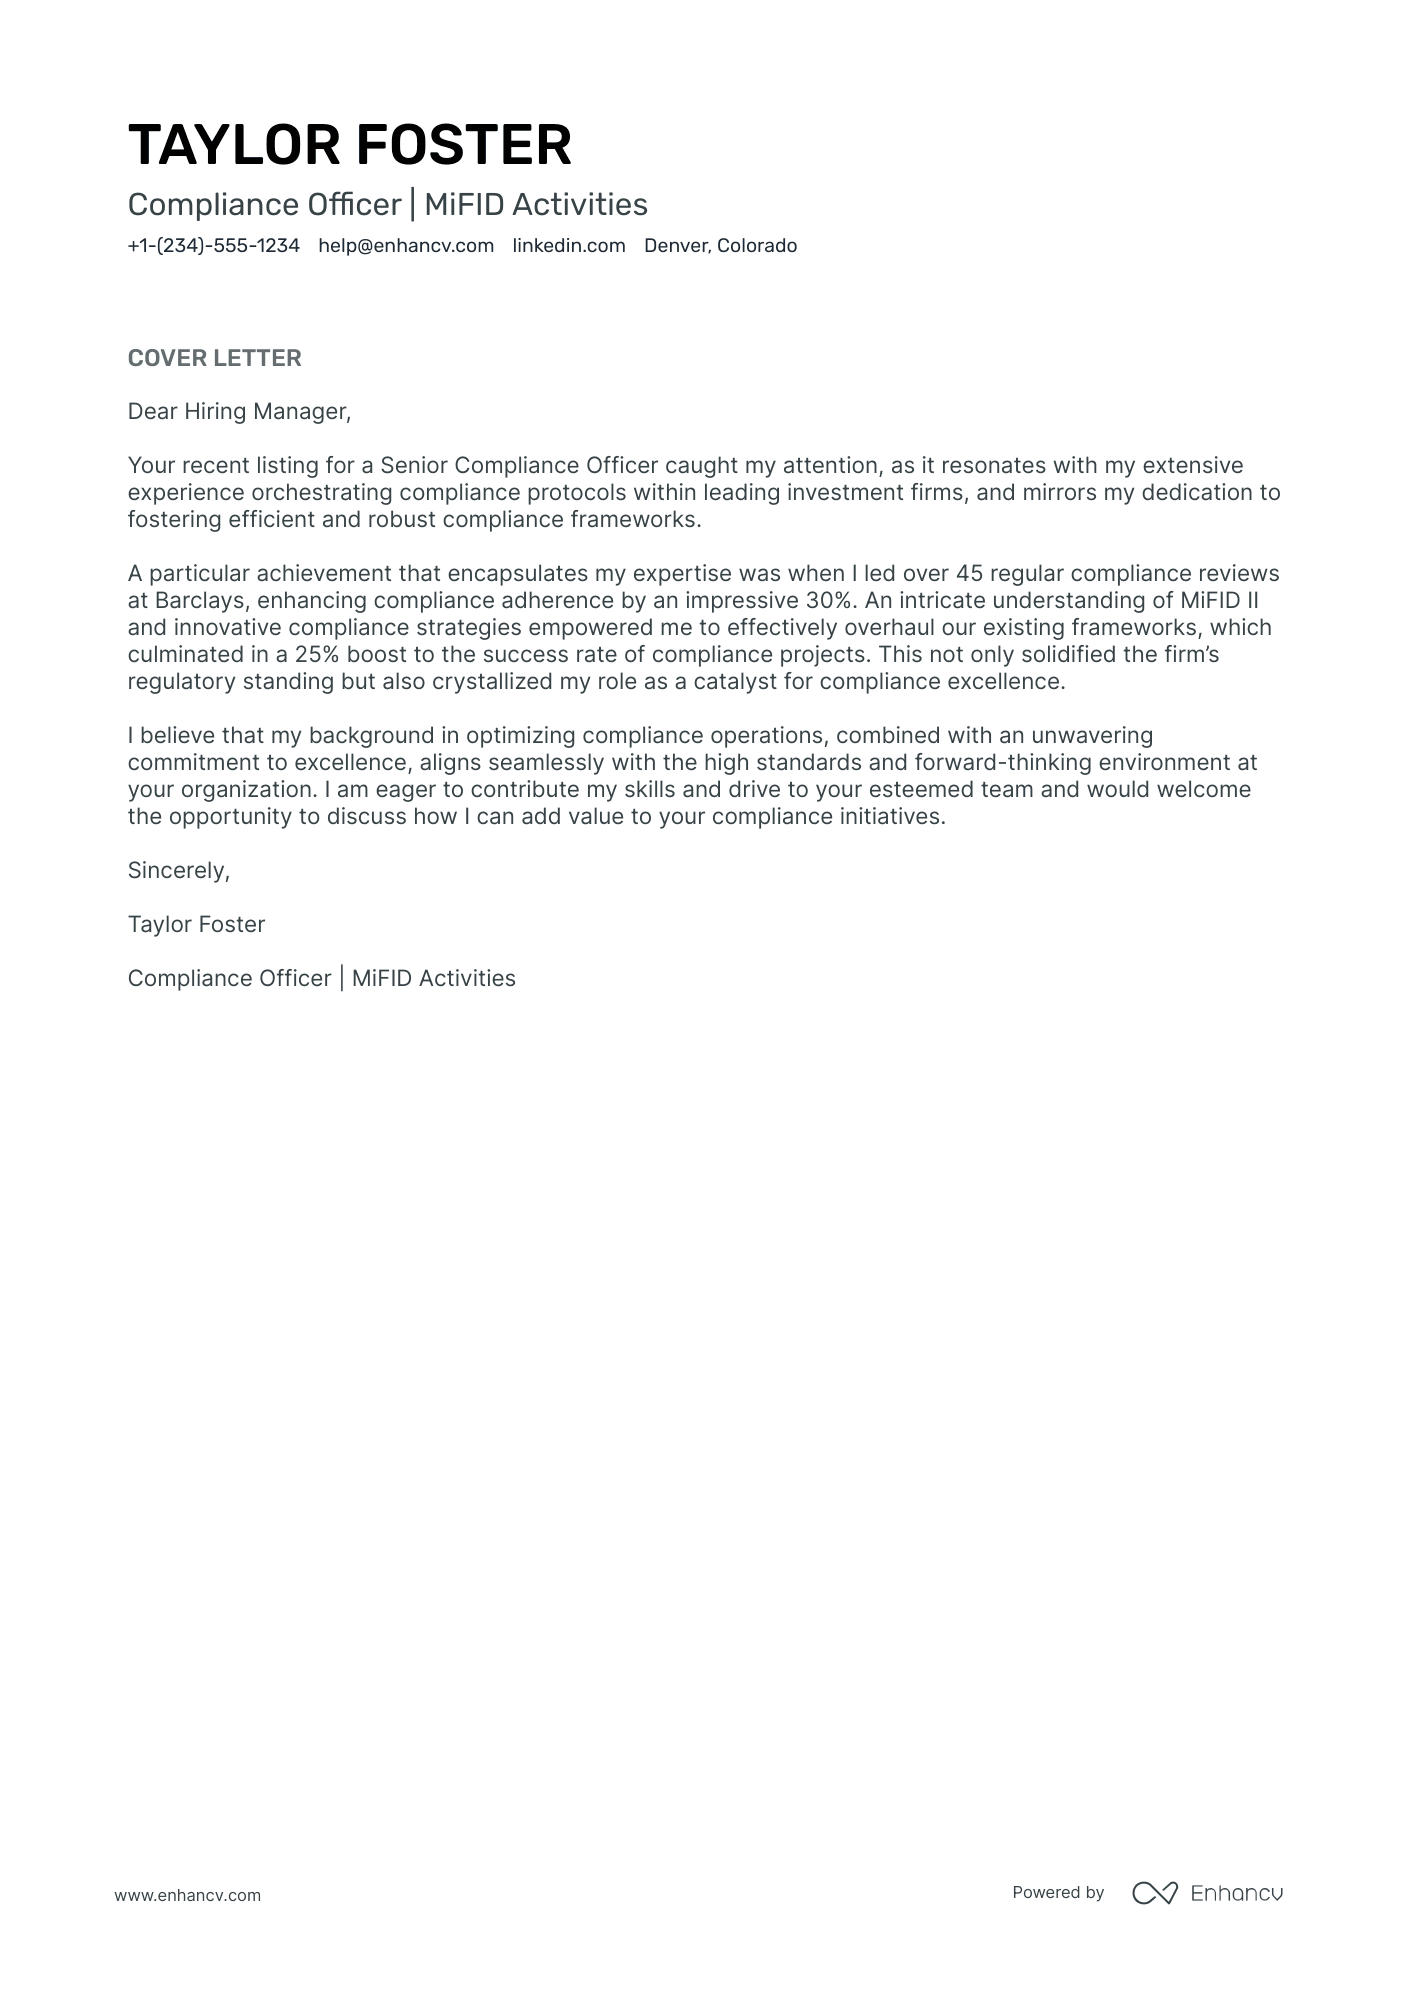 Compliance Officer cover letter